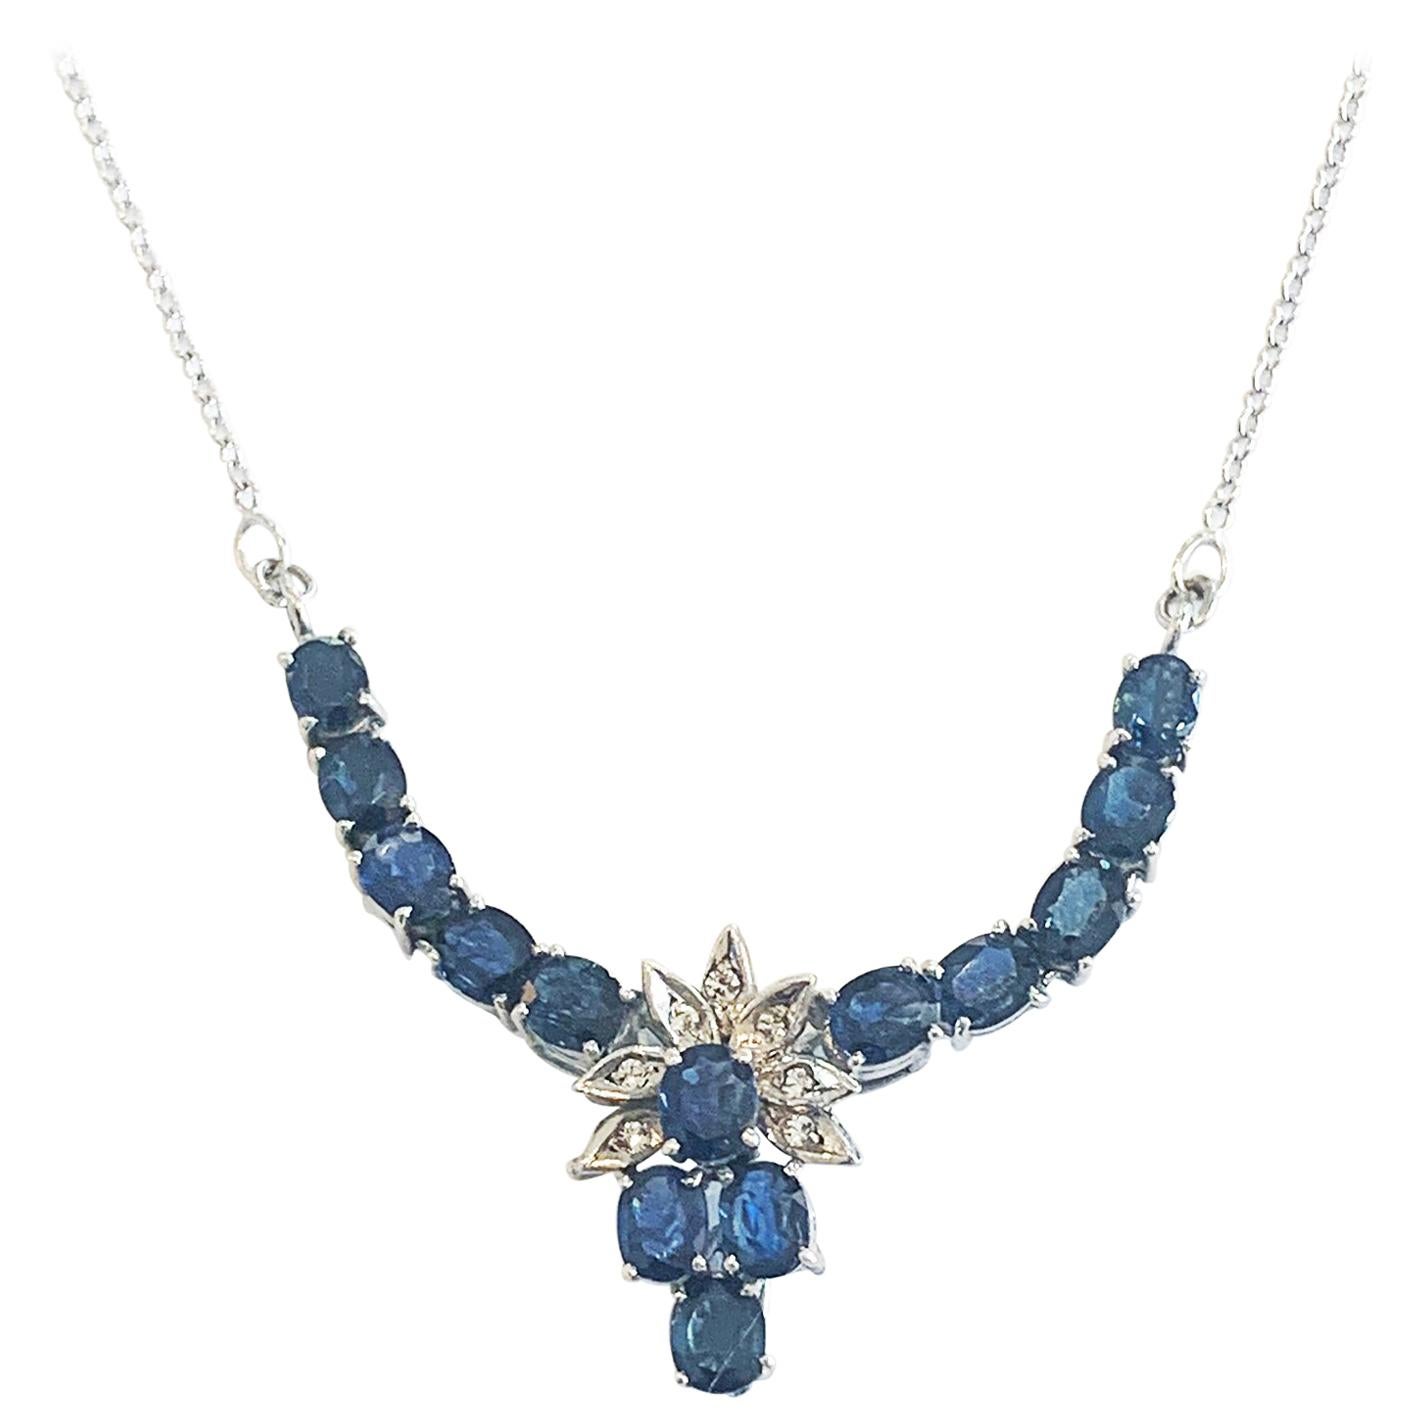 Art Deco Sapphire and Diamond necklace set in white gold and palladium